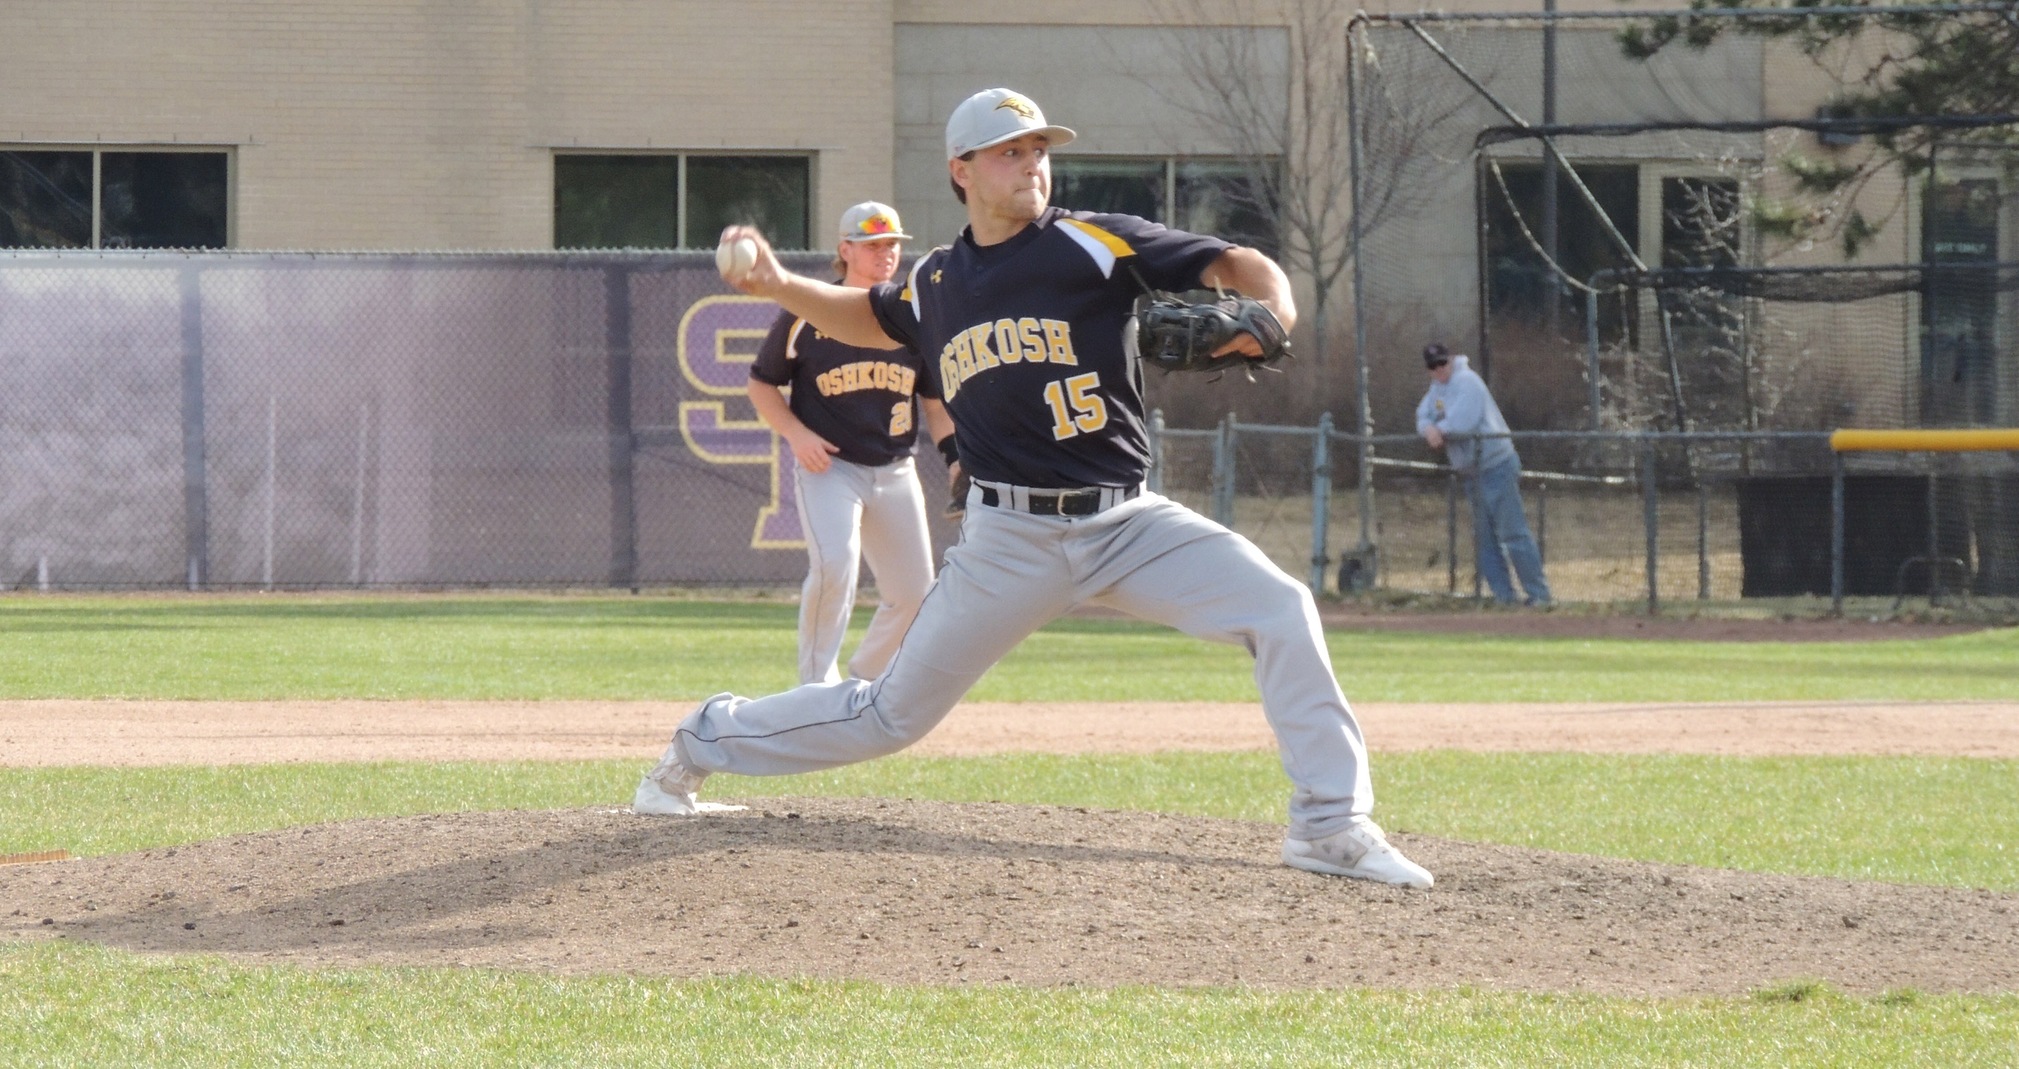 Nick McLees had six strikeouts in six scoreless innings of relief against the Pointers.